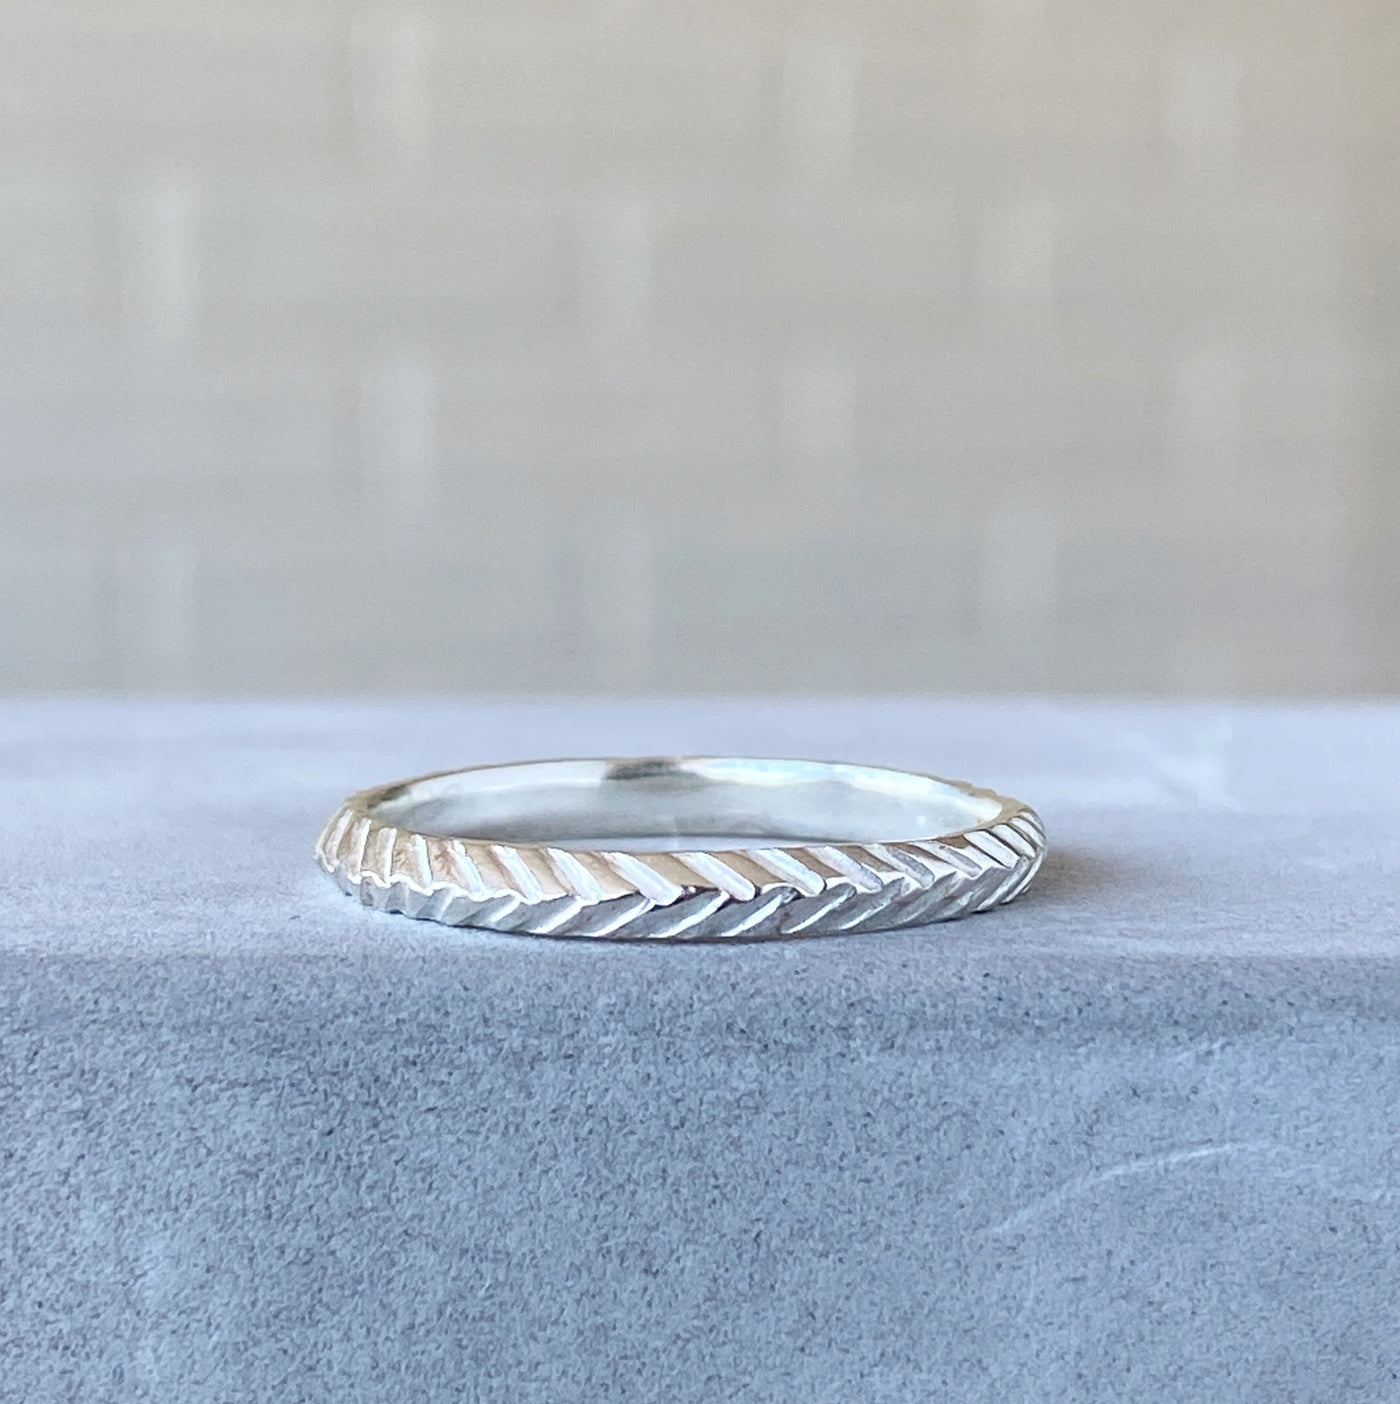 sterling silver stackable herringbone carved band 2mm width resting on concrete